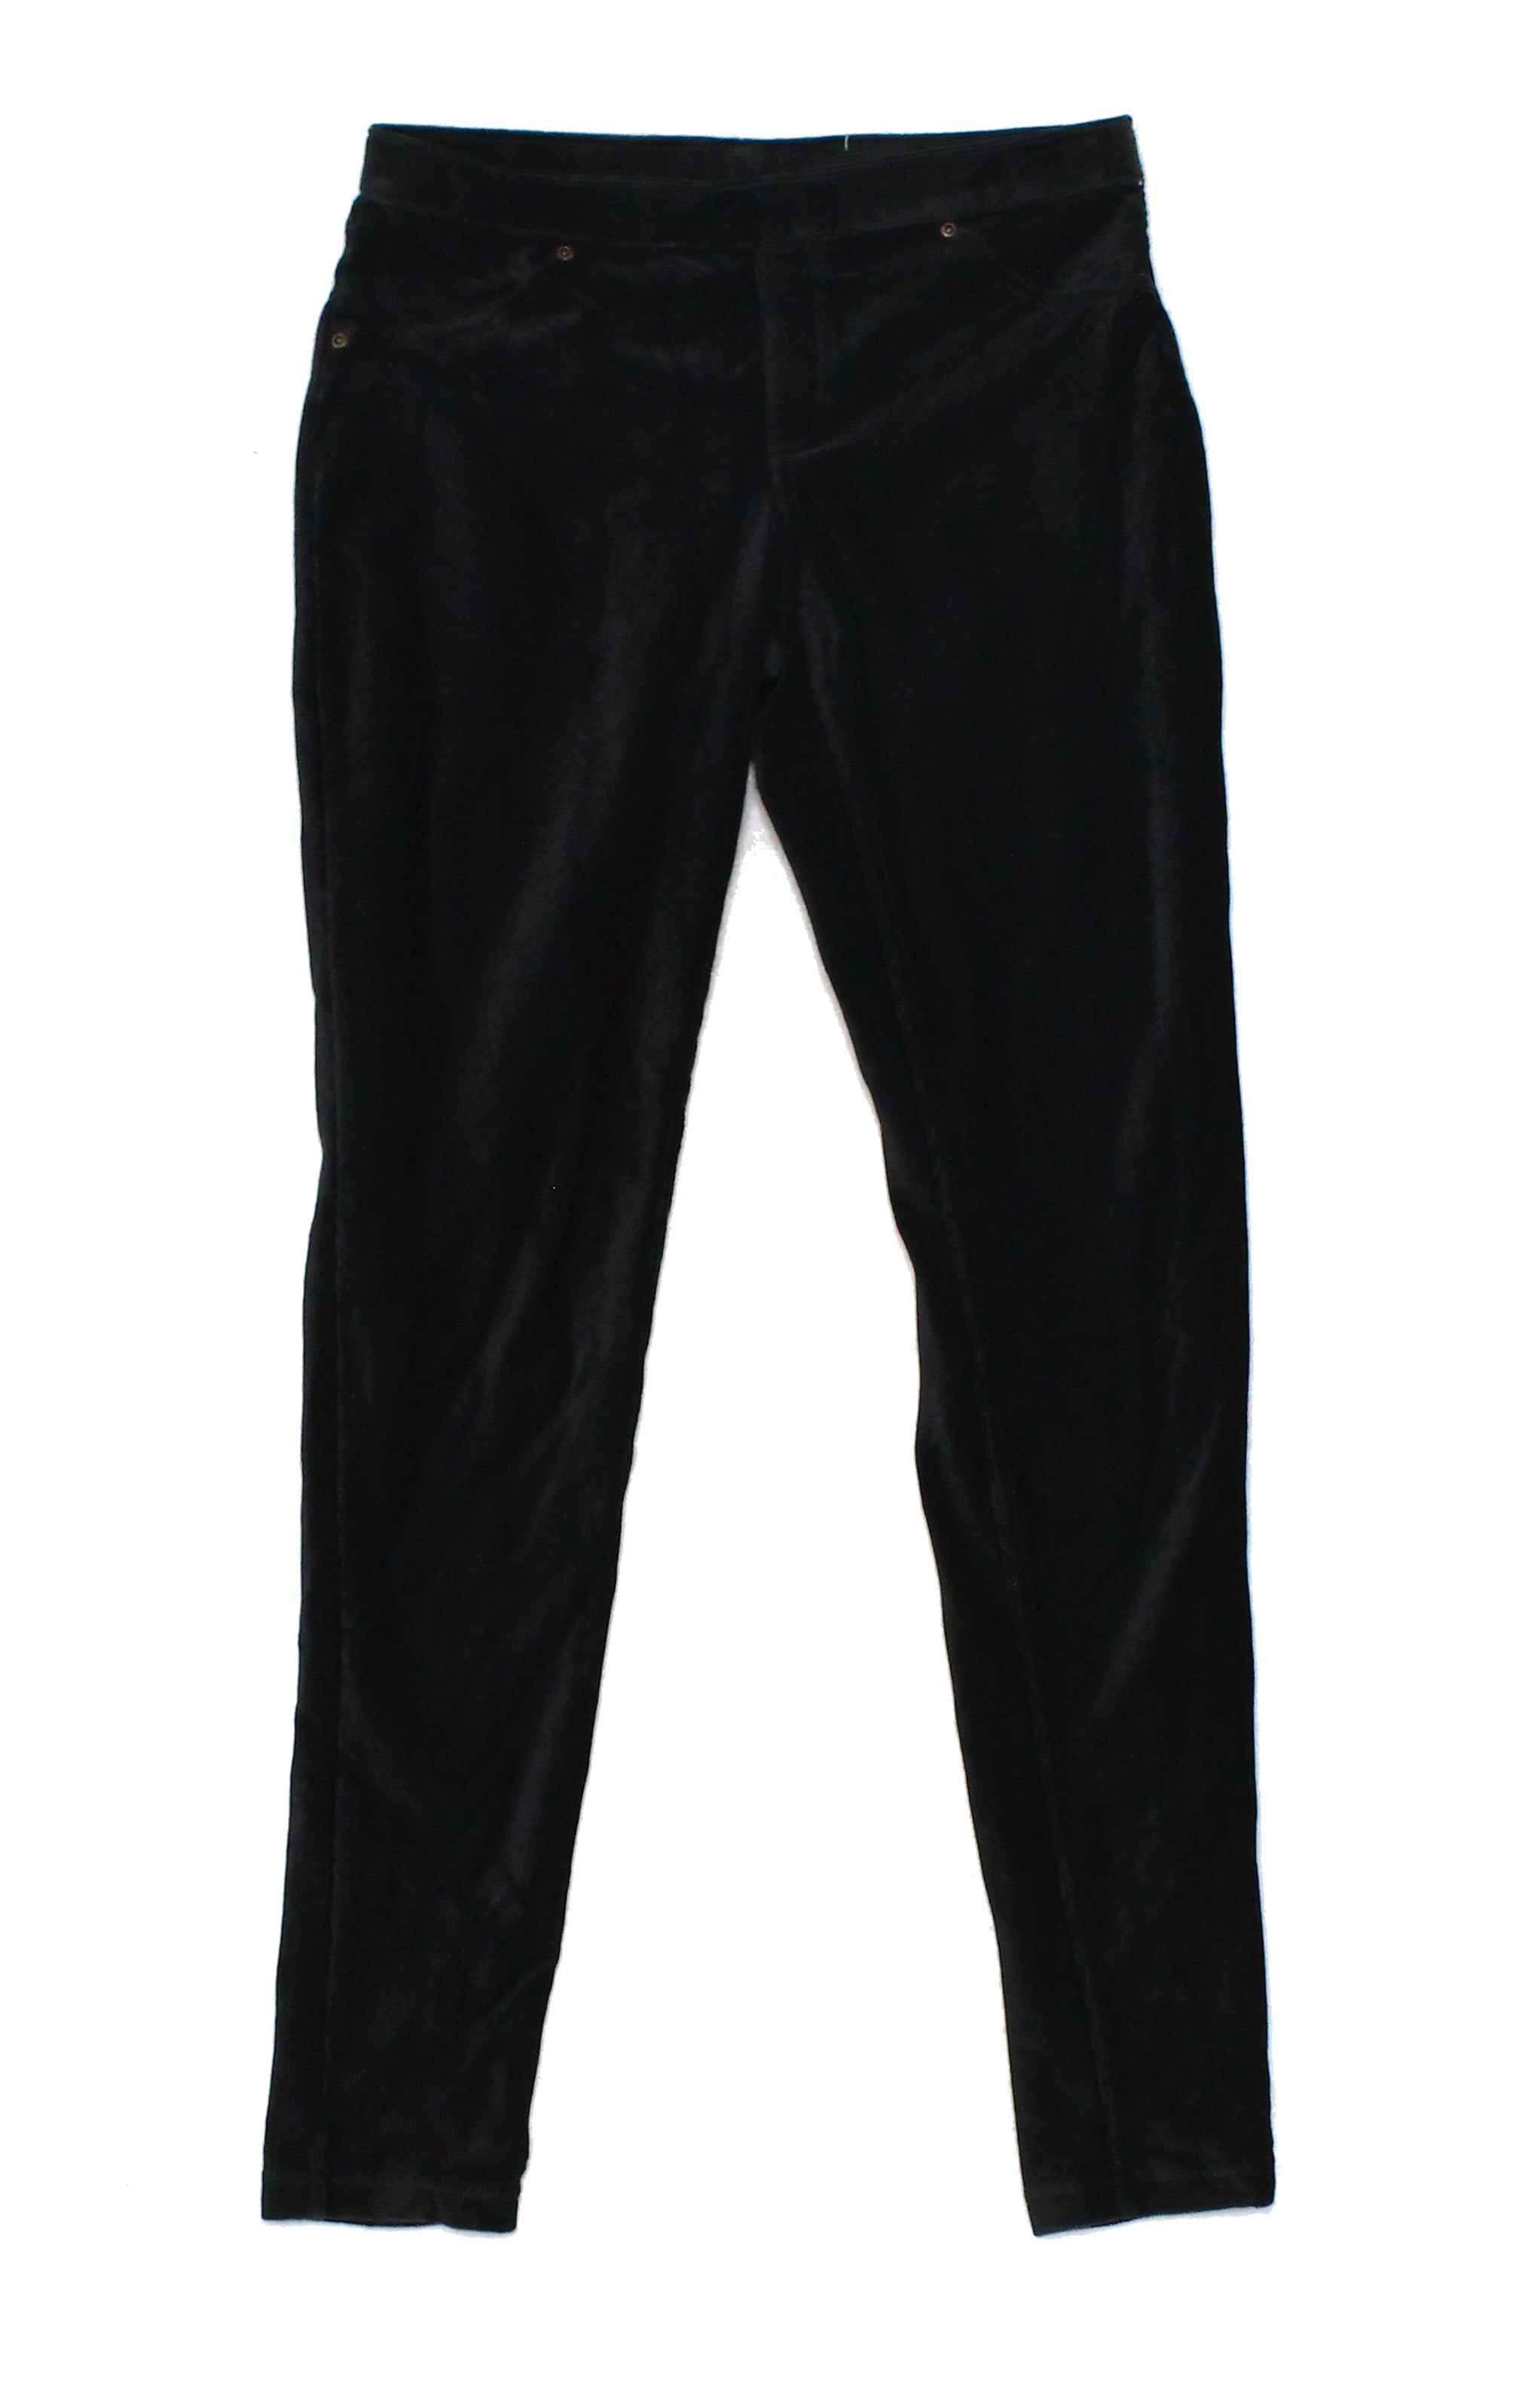 Hue - Hue NEW Black Womens Size Small S Stretch Pull-On Corduroys Pants ...